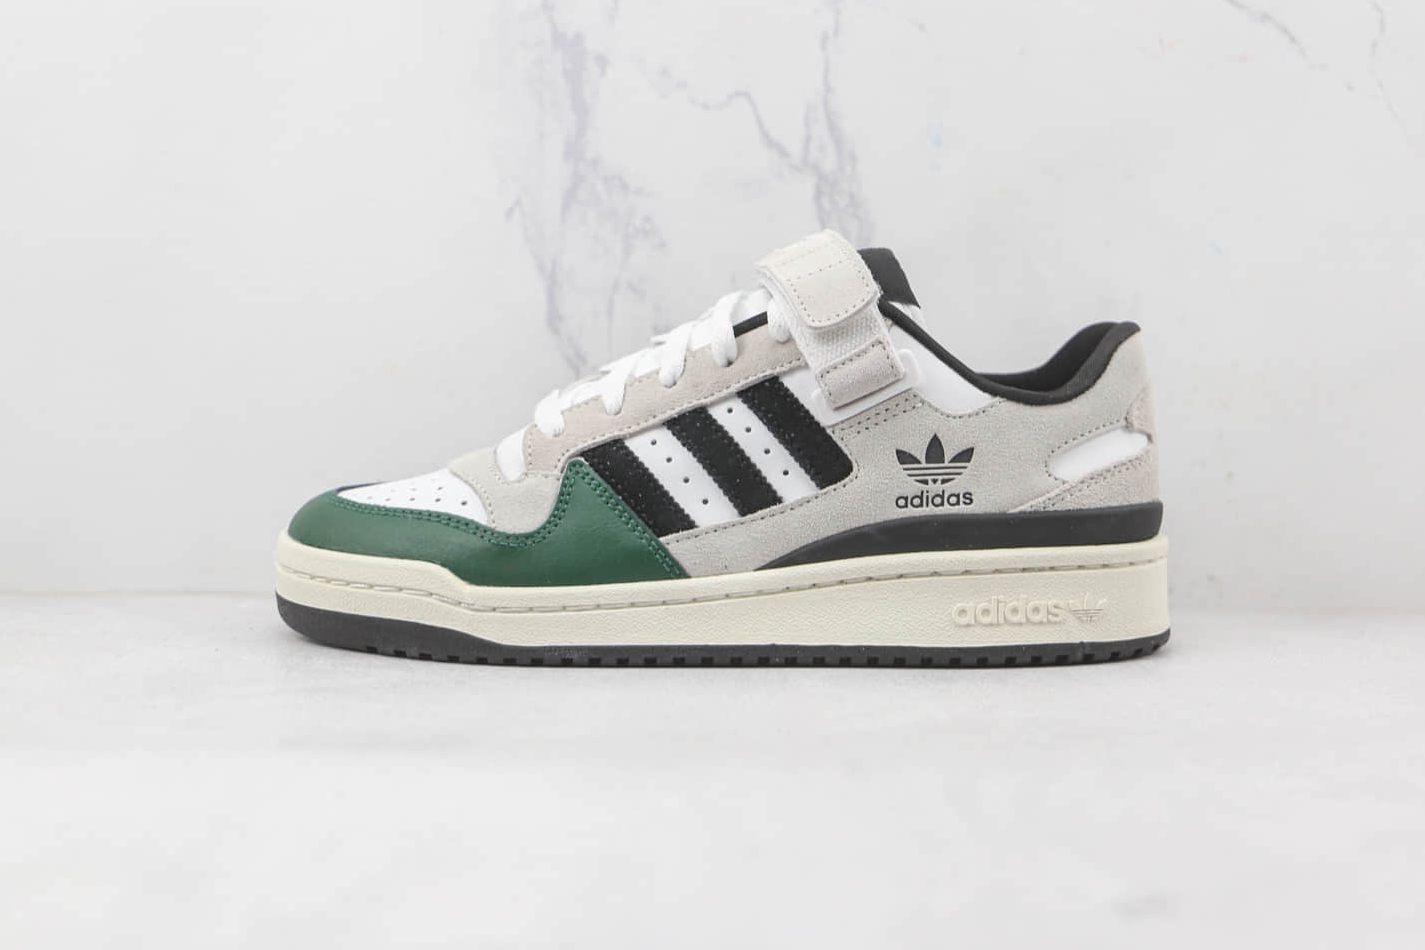 Adidas Originals Forum Low GY8203: Iconic Low-Top Sneakers